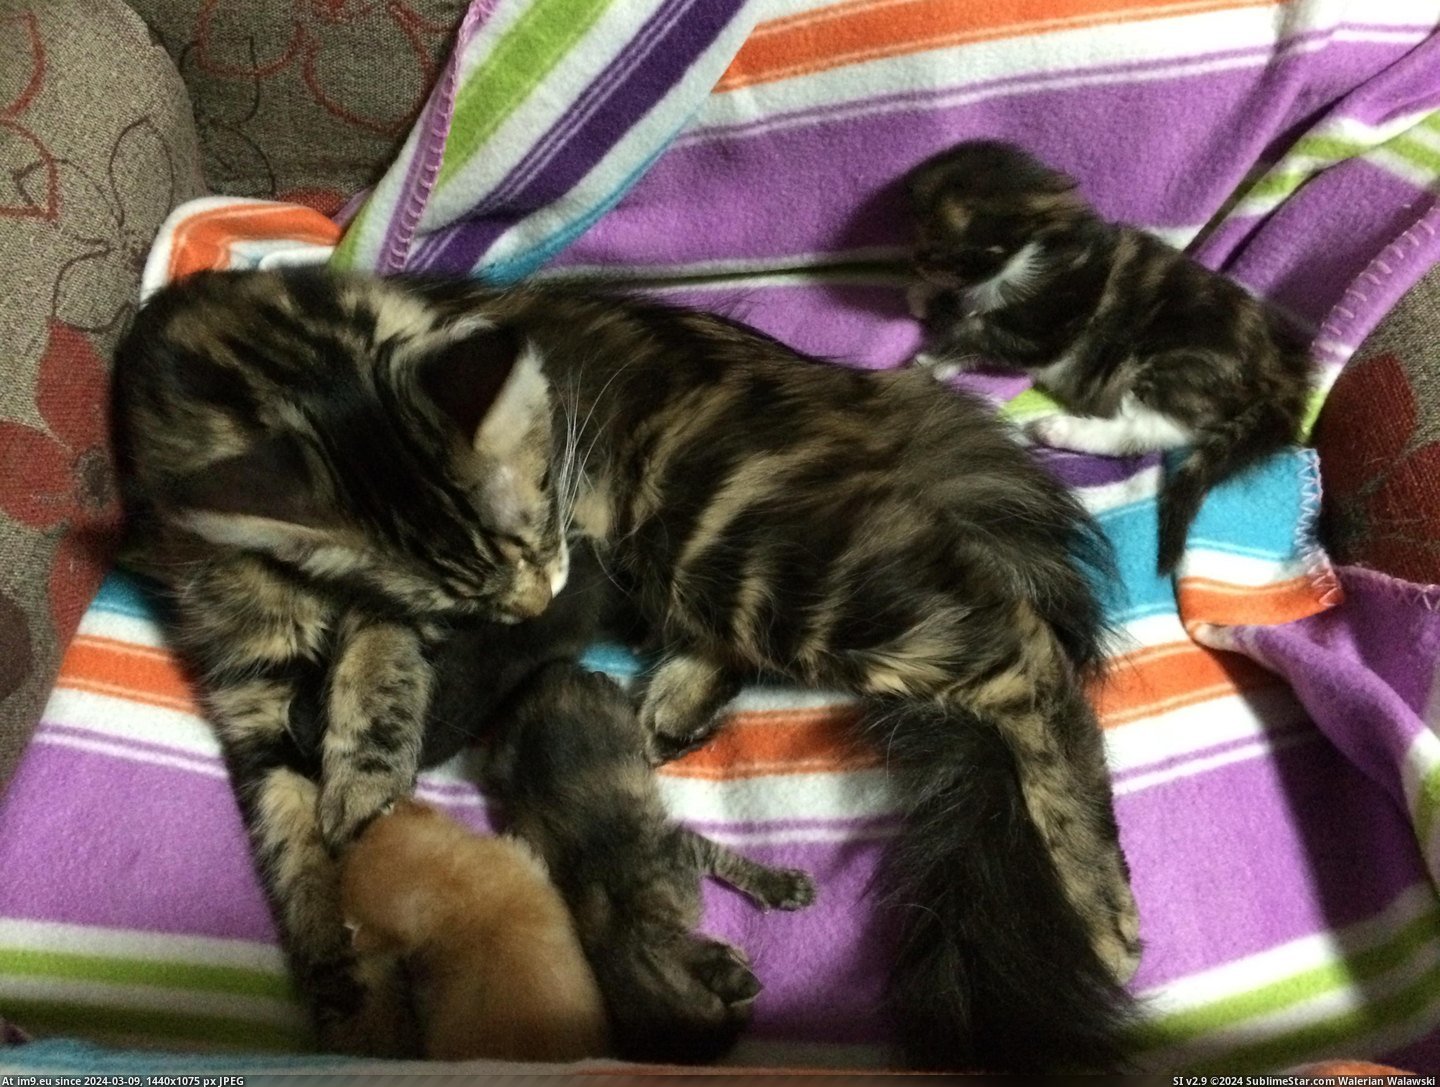 #Cats #Great #Kitten #Local #Choice #Coon #Momma #Abandoned #Kittens #Shelter #Maine [Cats] My Maine Coon momma only had 1 kitten, a local shelter had 3 abandoned kittens; we made a great choice. Pic. (Bild von album My r/CATS favs))